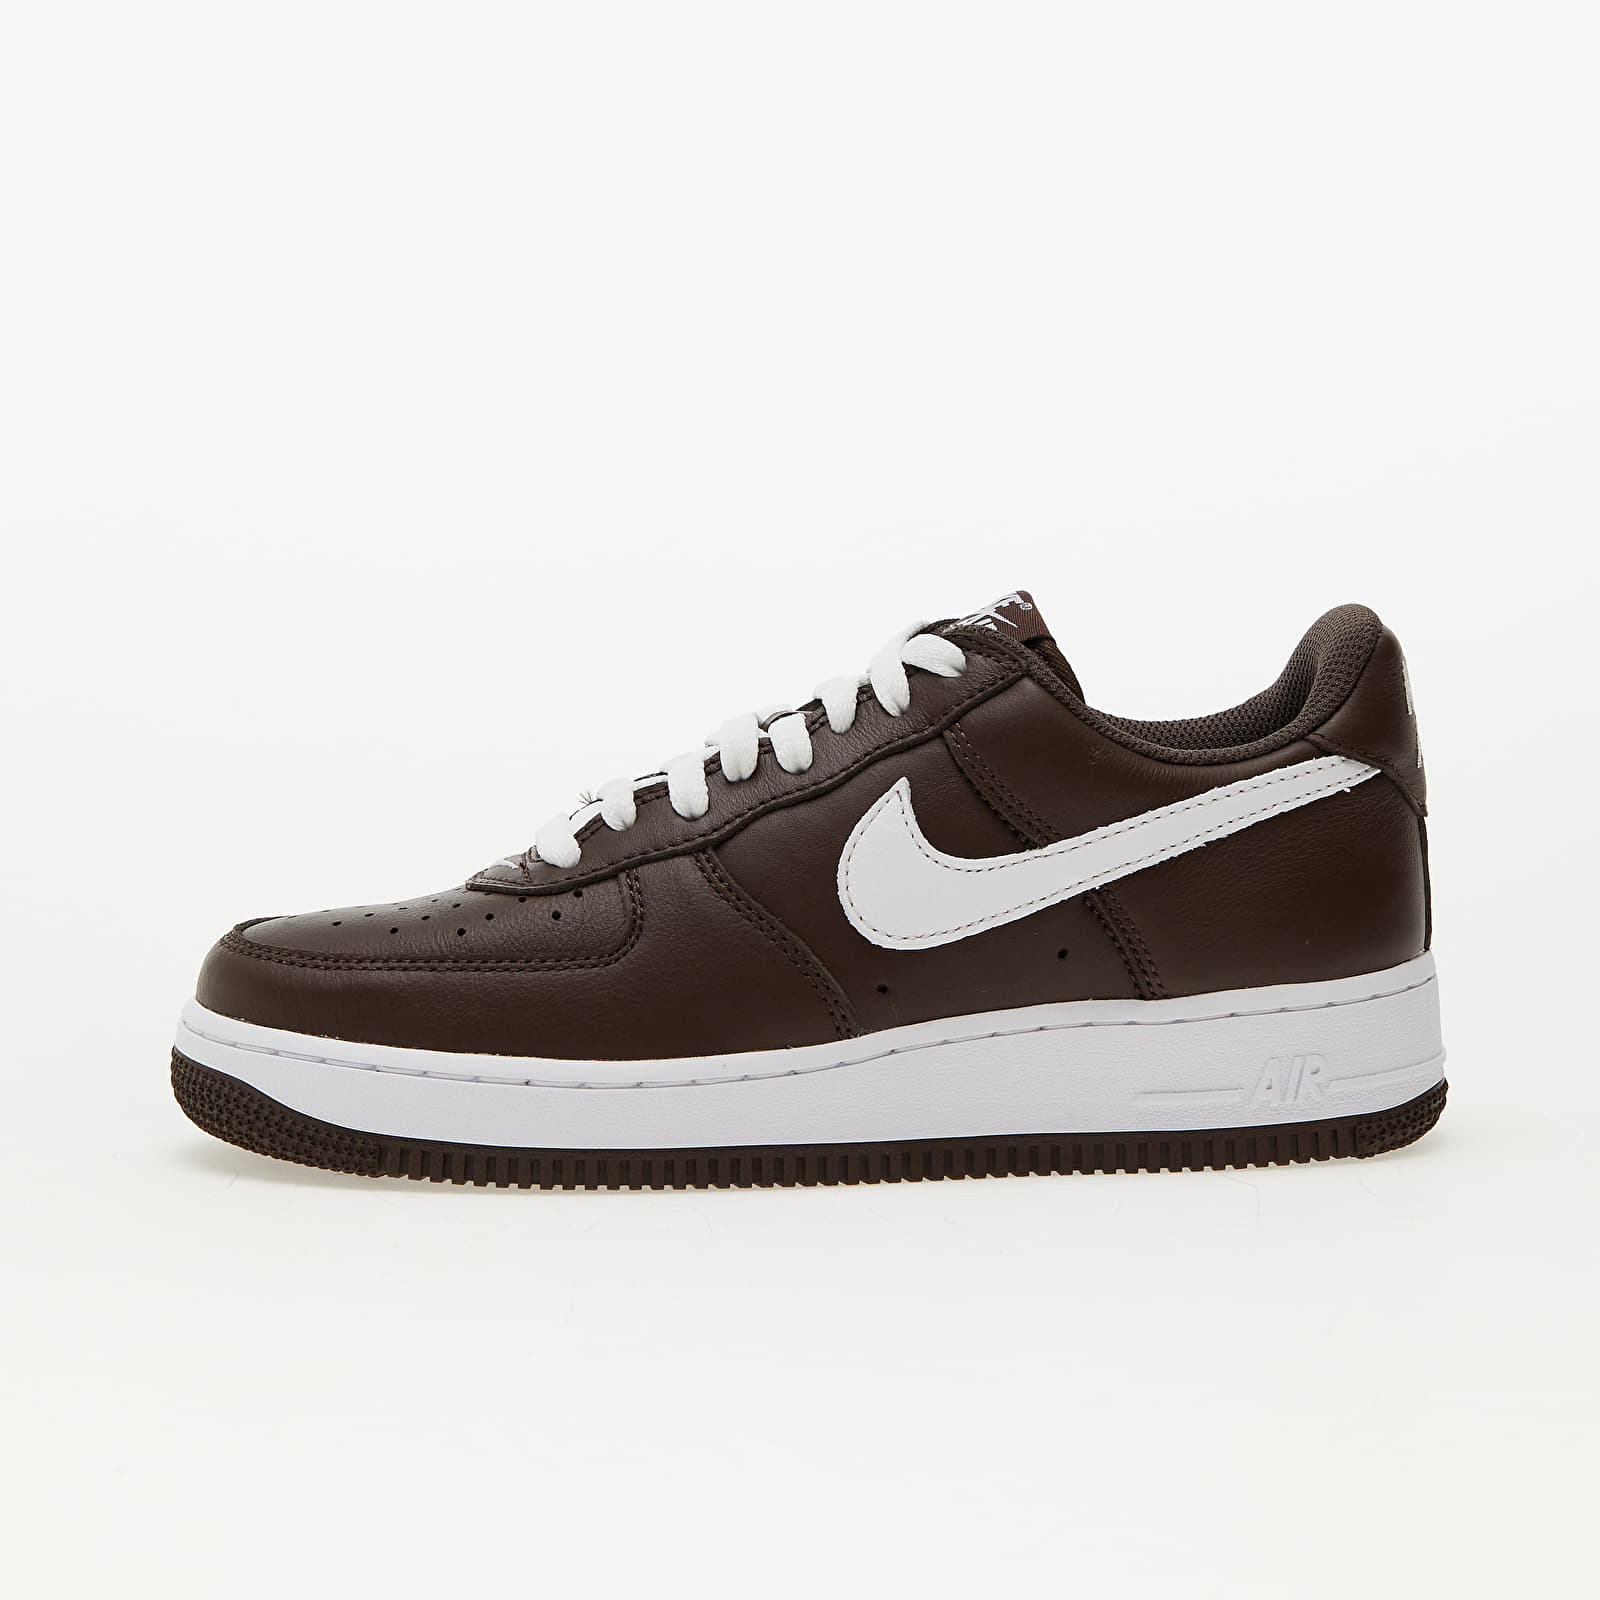 Levně Nike Air Force 1 Low Retro Chocolate/ White